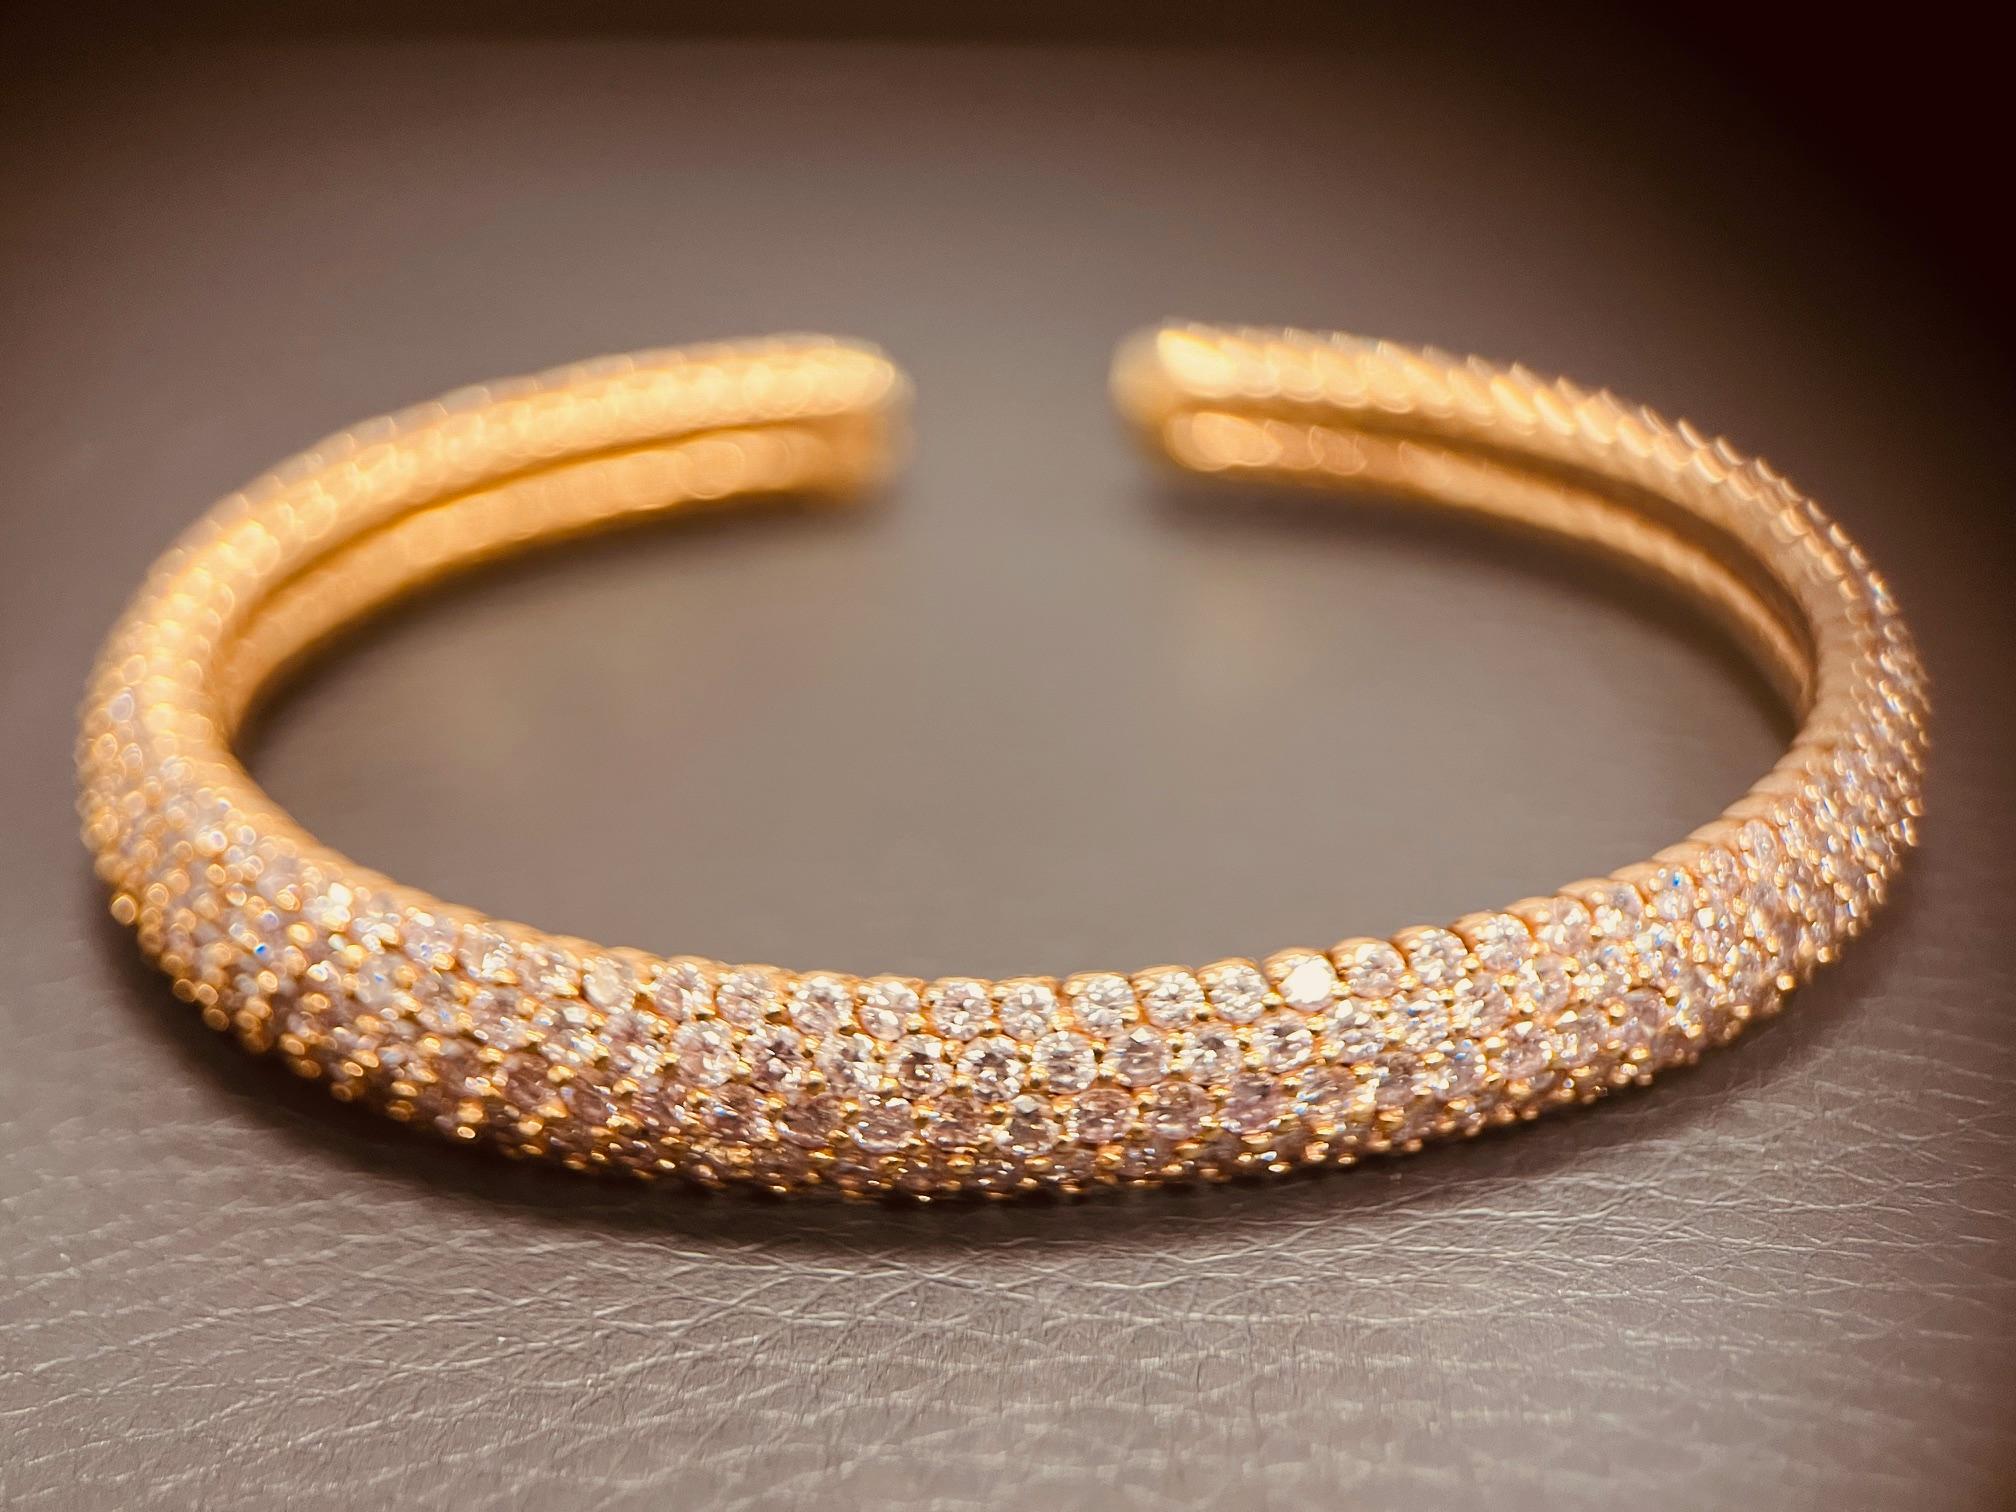 A pavé set fancy pink diamond bangle in 18ct pink gold; With approximately 12cts of diamonds of strong pink hue. Bangle width 9mm. External circumference: 5.7mm. Internal circumference: 5mm. Signed avakian
750 18K. Circa 1990’s. Price: £44,000. Item